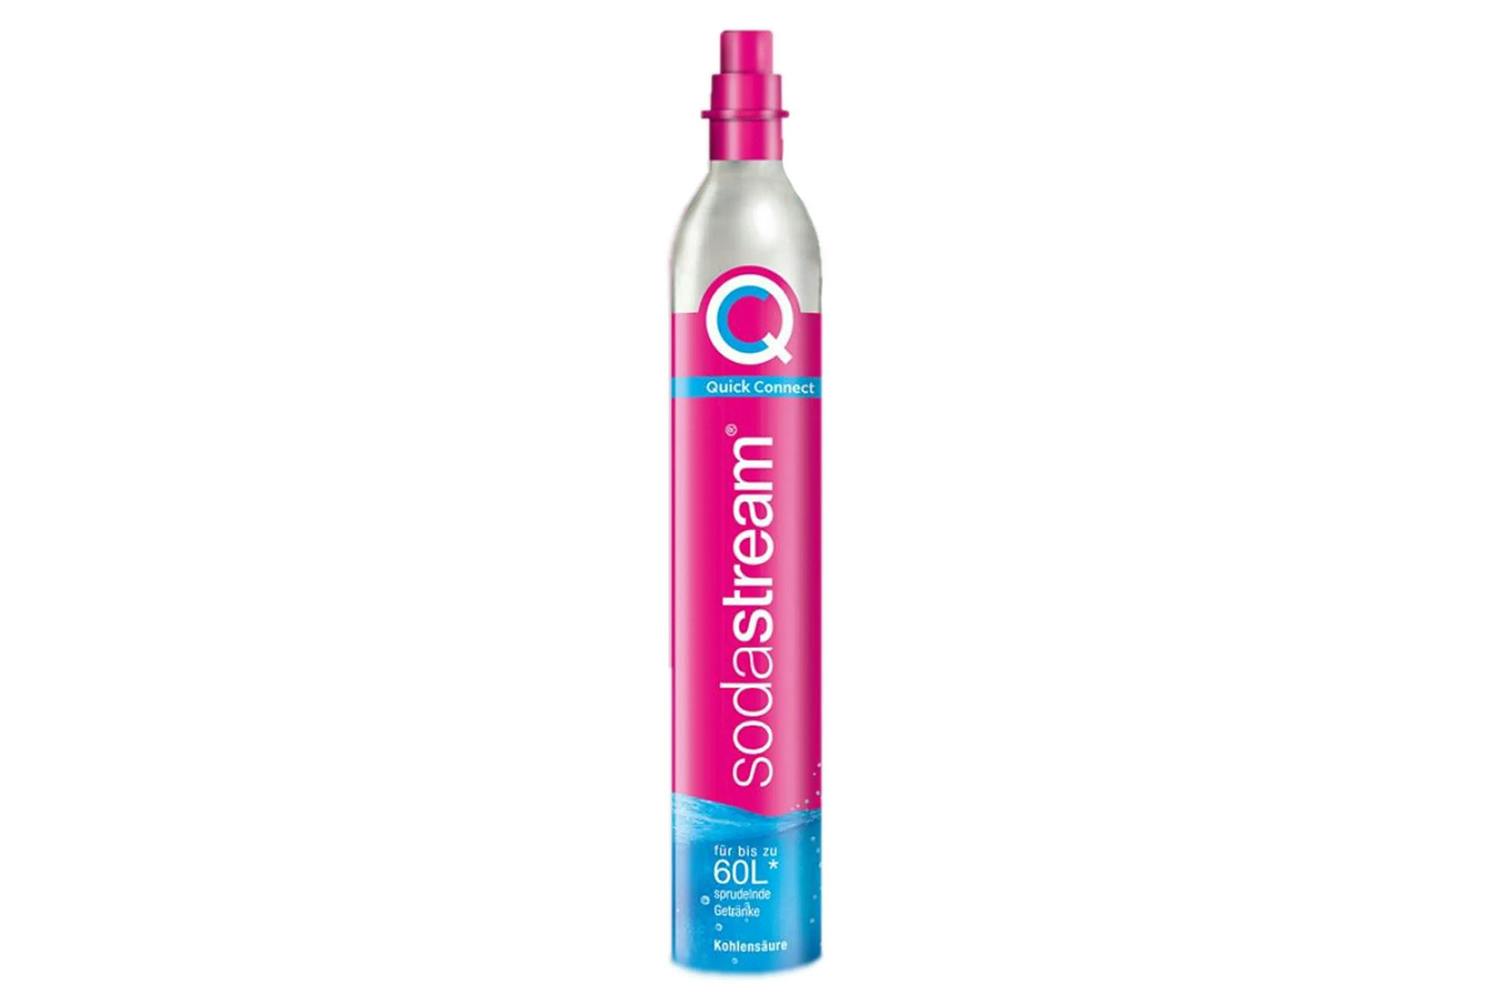 SodaStream 60L Quick Connector CO2 Cylinder